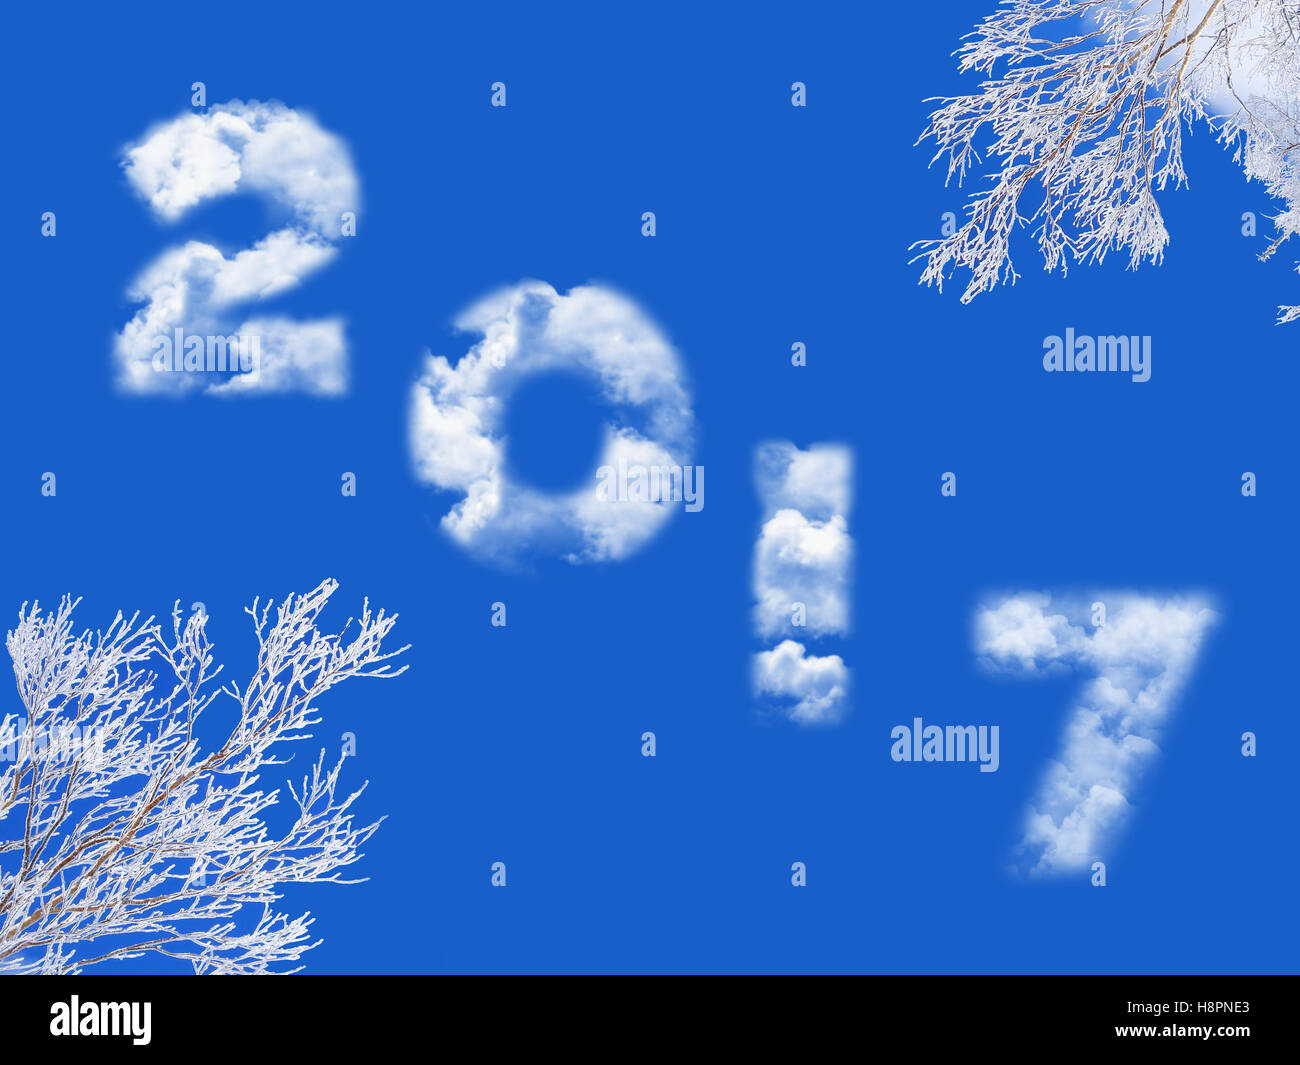 2017 written with clouds, blue sky and snowy tree branches Stock Photo